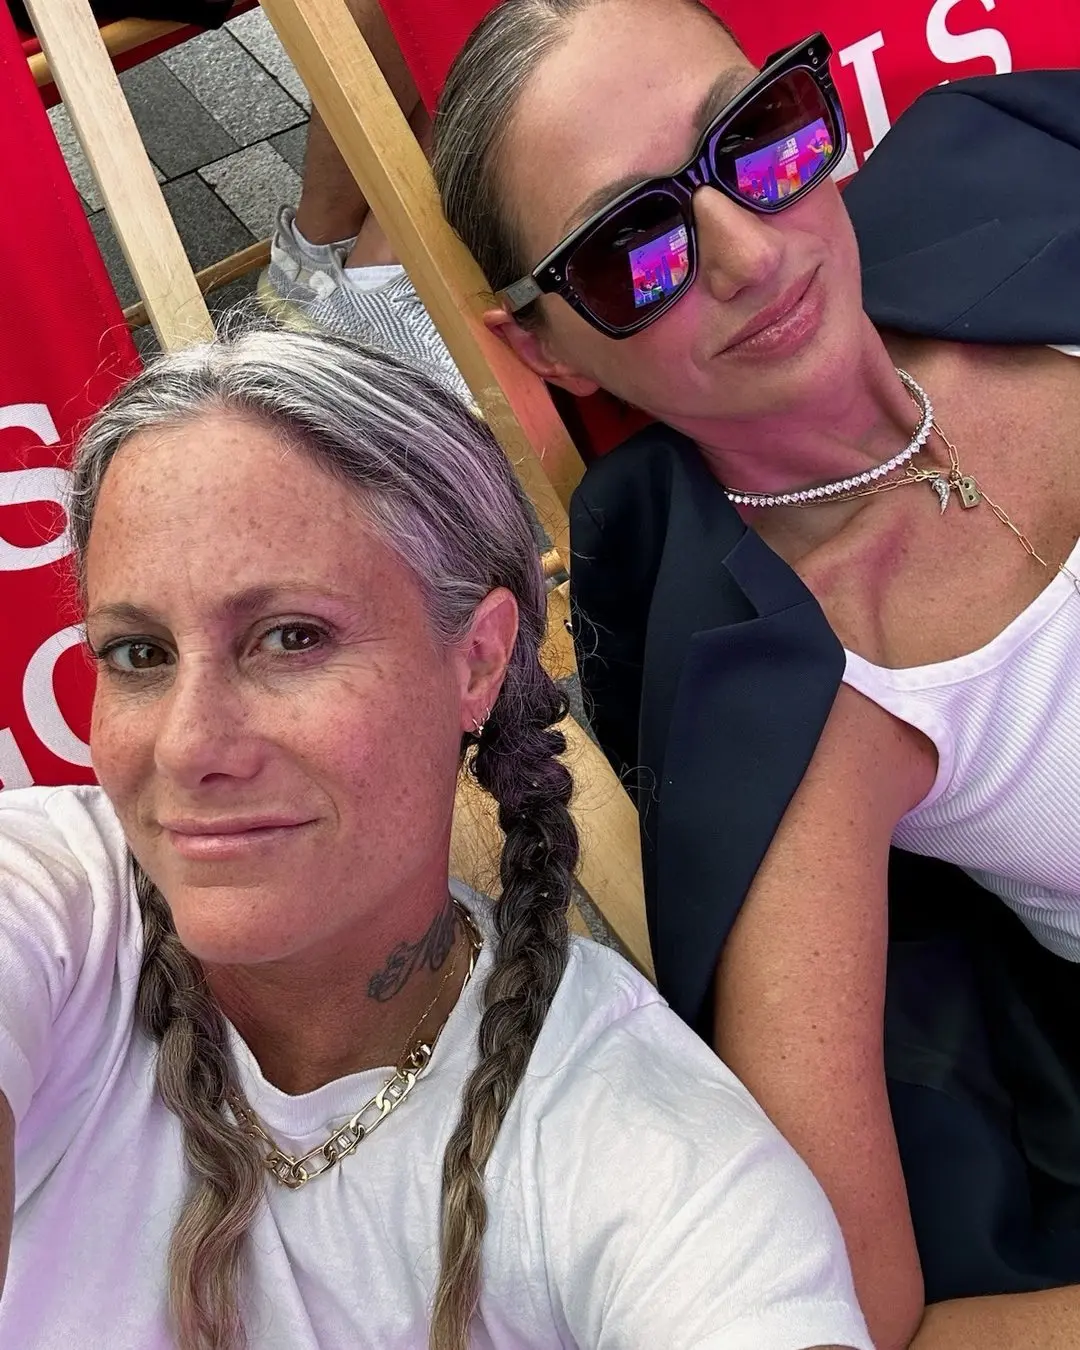 Is Jenna Lyons Set to Tie the Knot? A Glimpse of a Diamond Sparks Engagement Buzz!